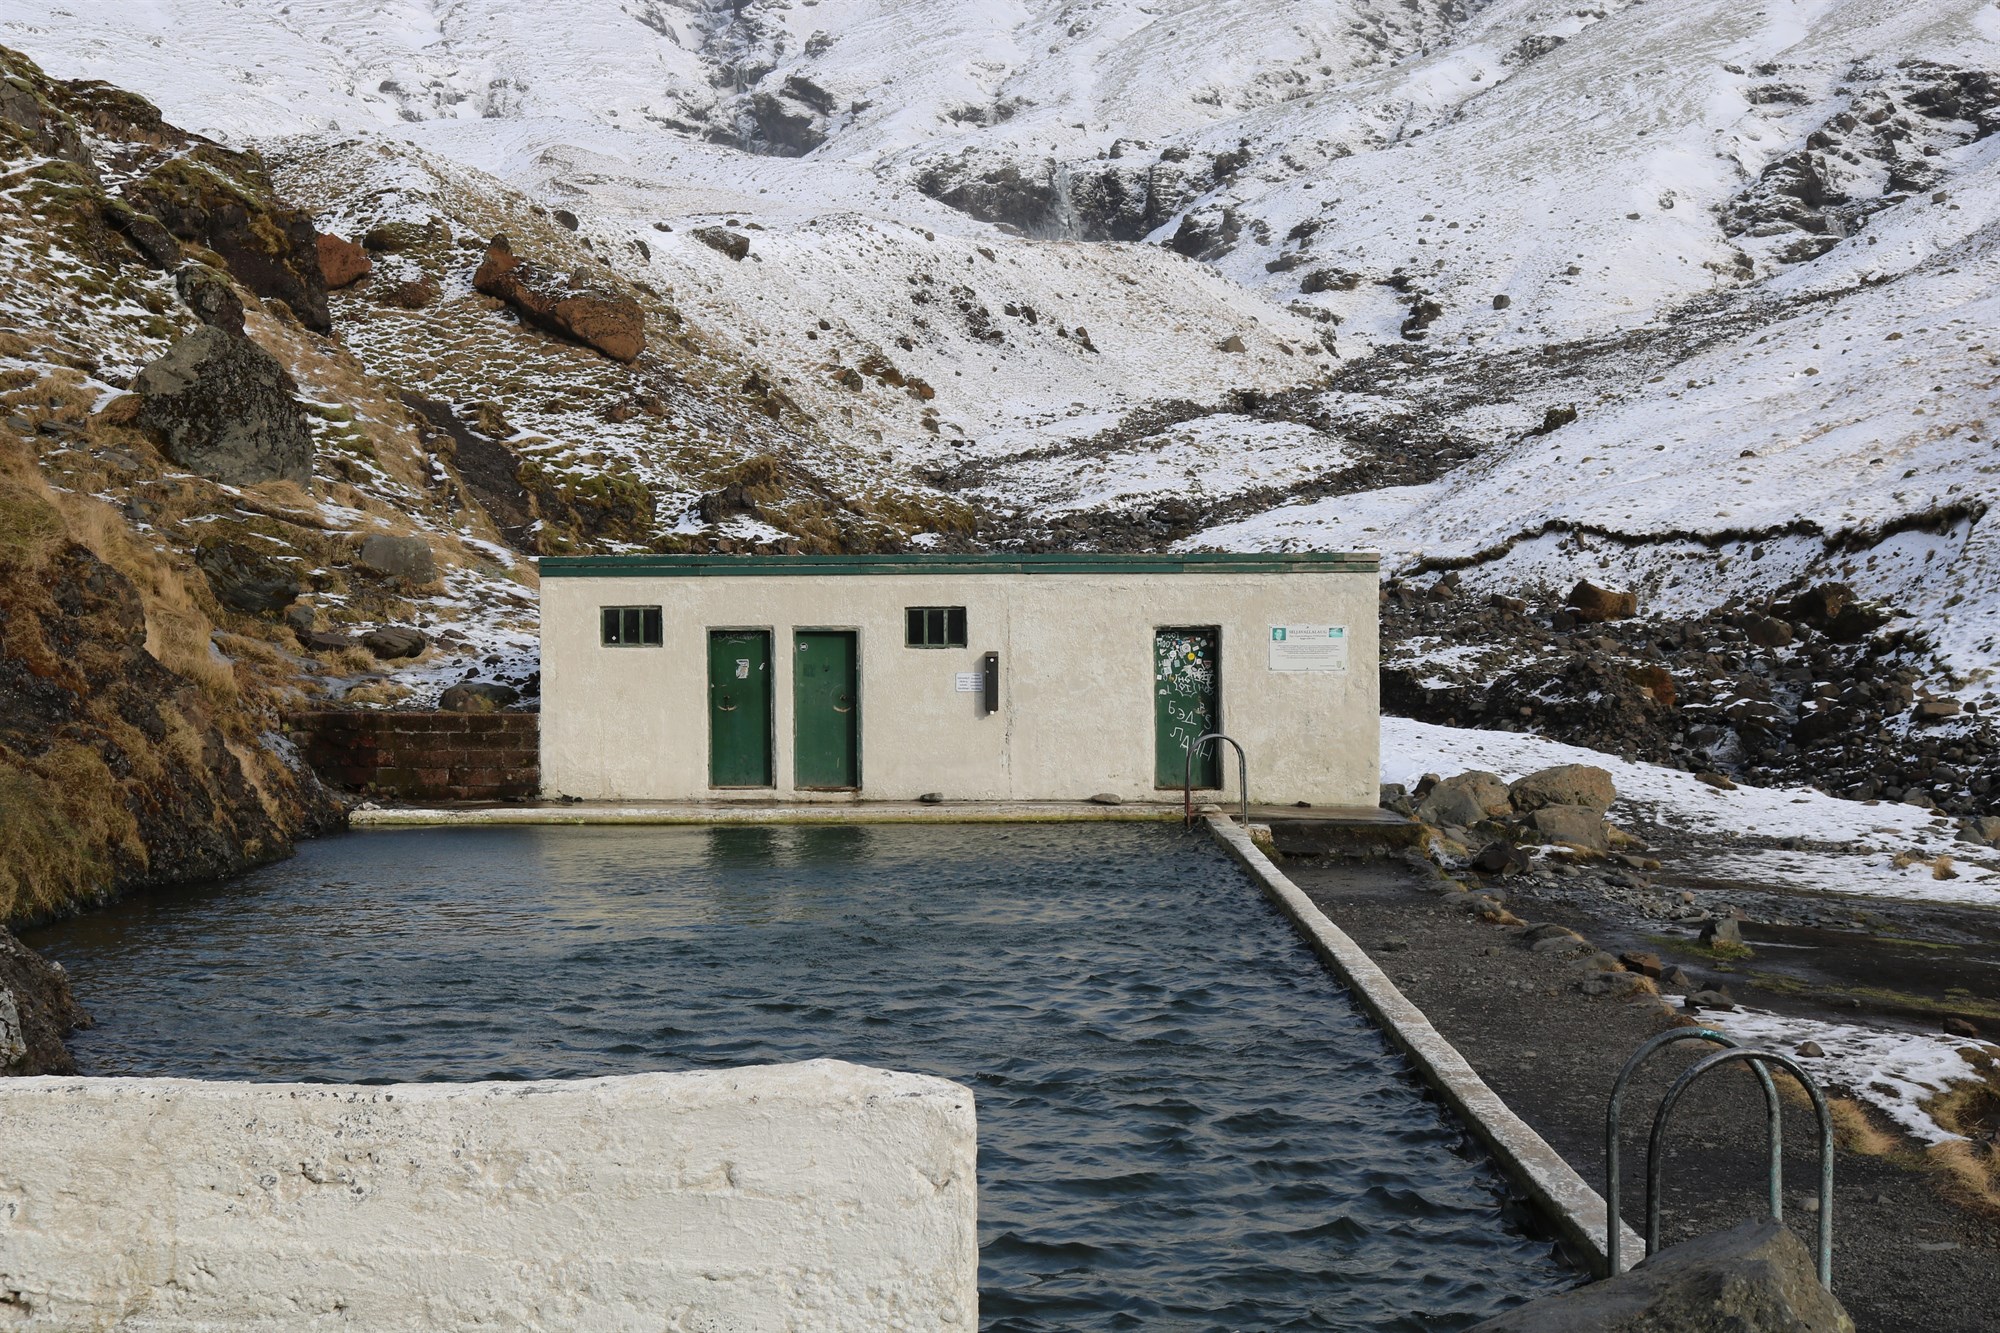 Seljavallalaug hot spring with changing facilities surrounded by rocky Iceland landscapes.